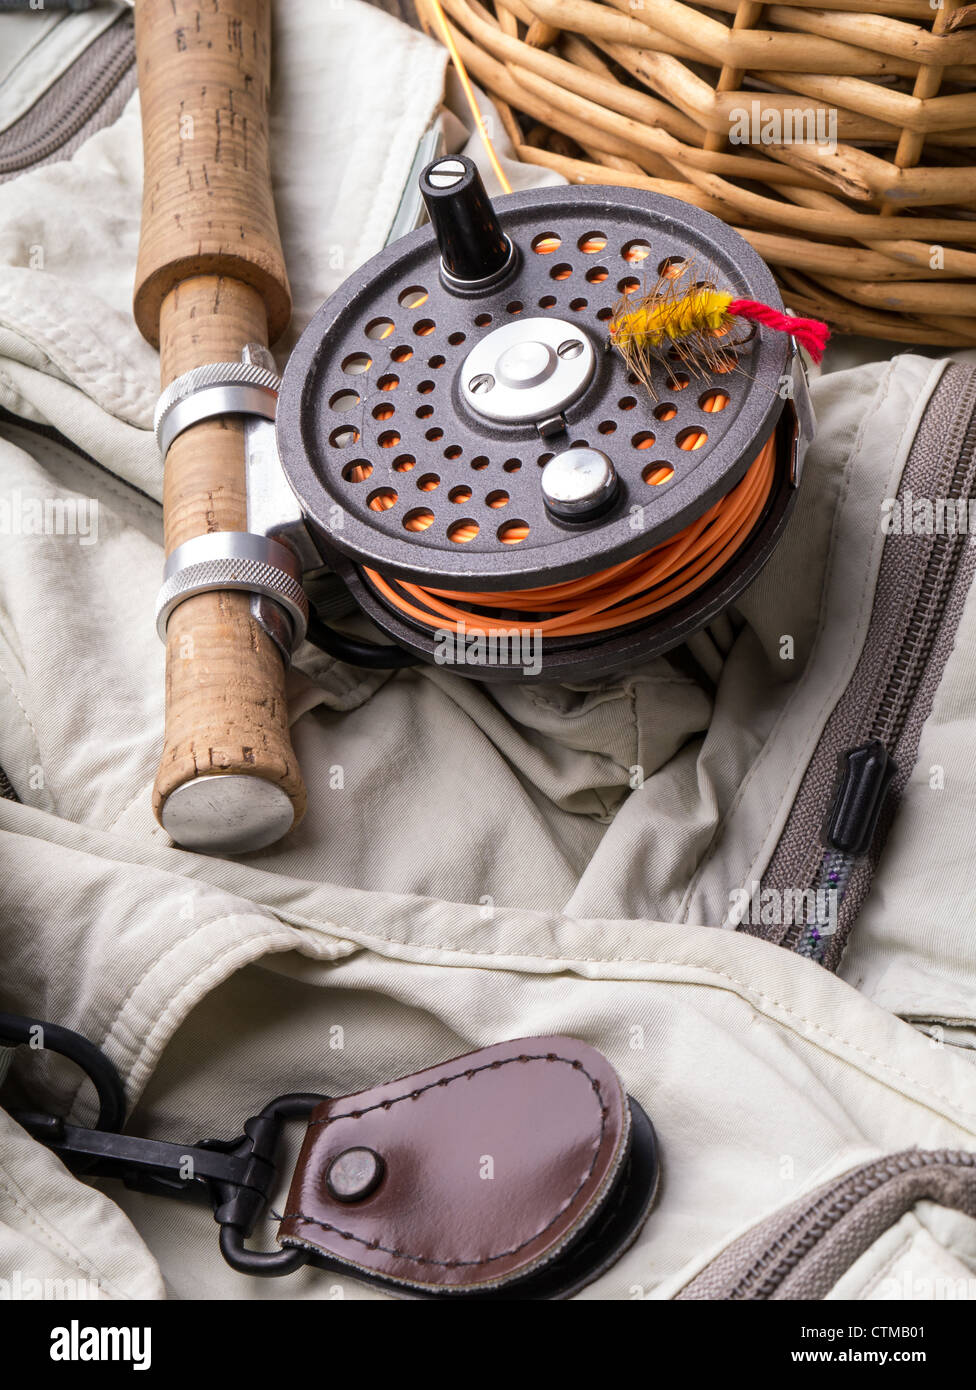 Fly fishing still life with rod, reel, creel and vest. Stock Photo